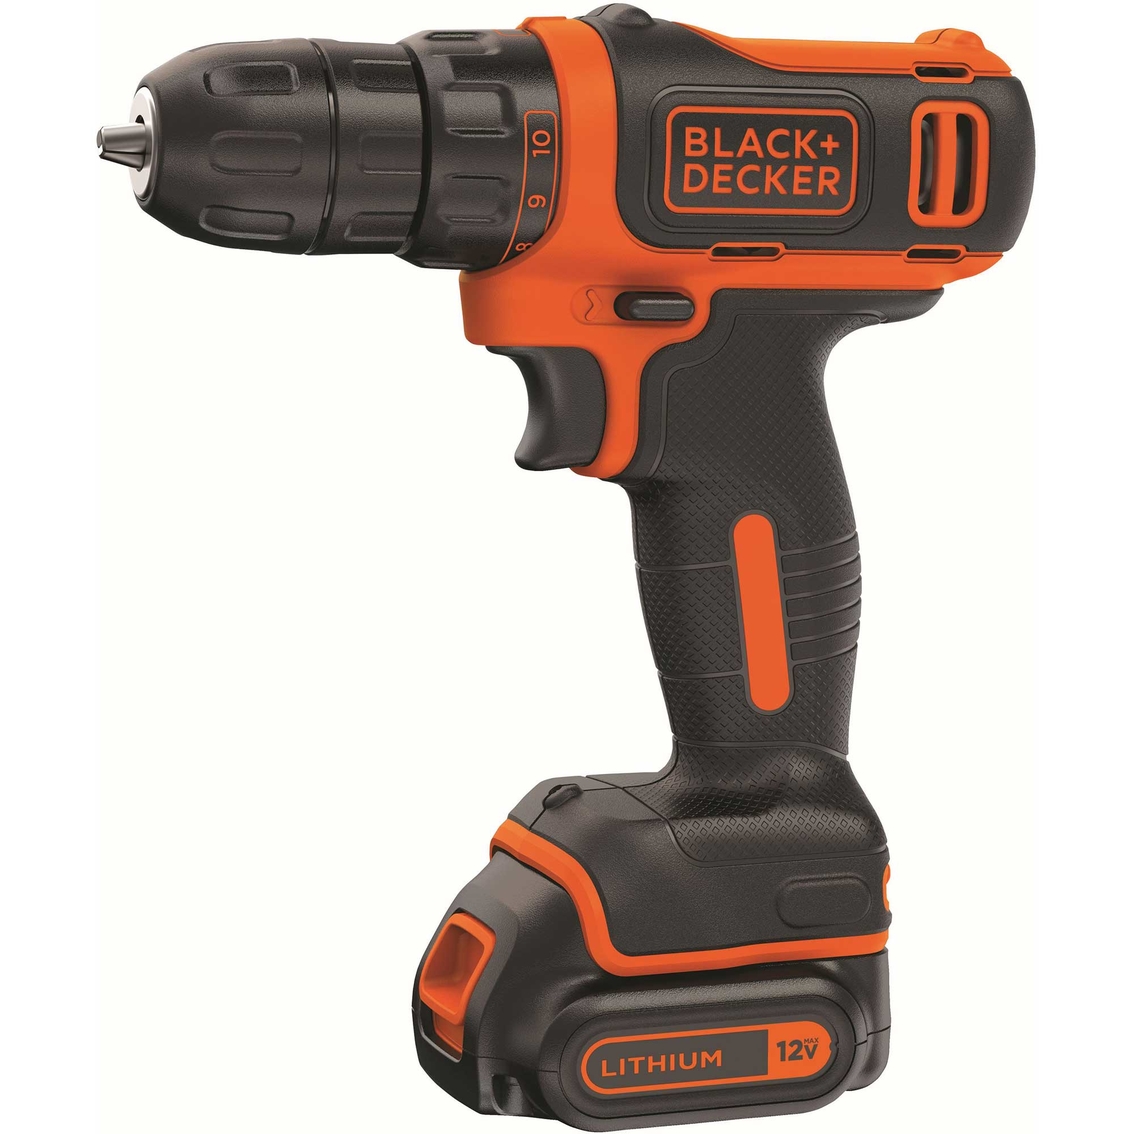 Black + Decker 12V Max Cordless Lithium Drill/Driver Project Kit - Image 2 of 10